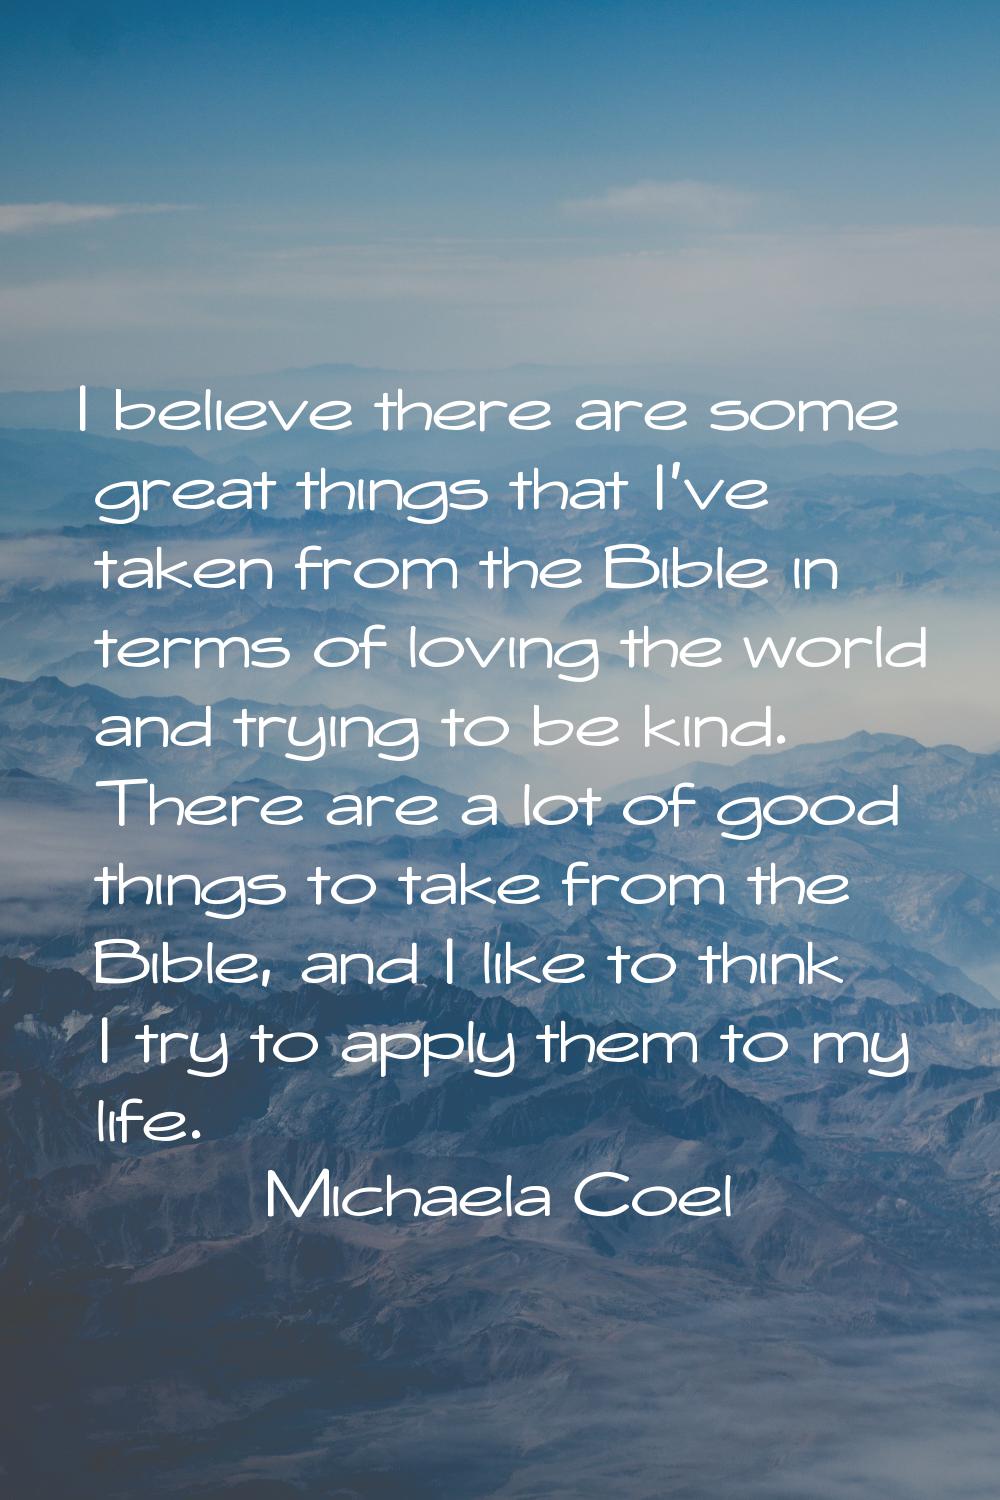 I believe there are some great things that I've taken from the Bible in terms of loving the world a